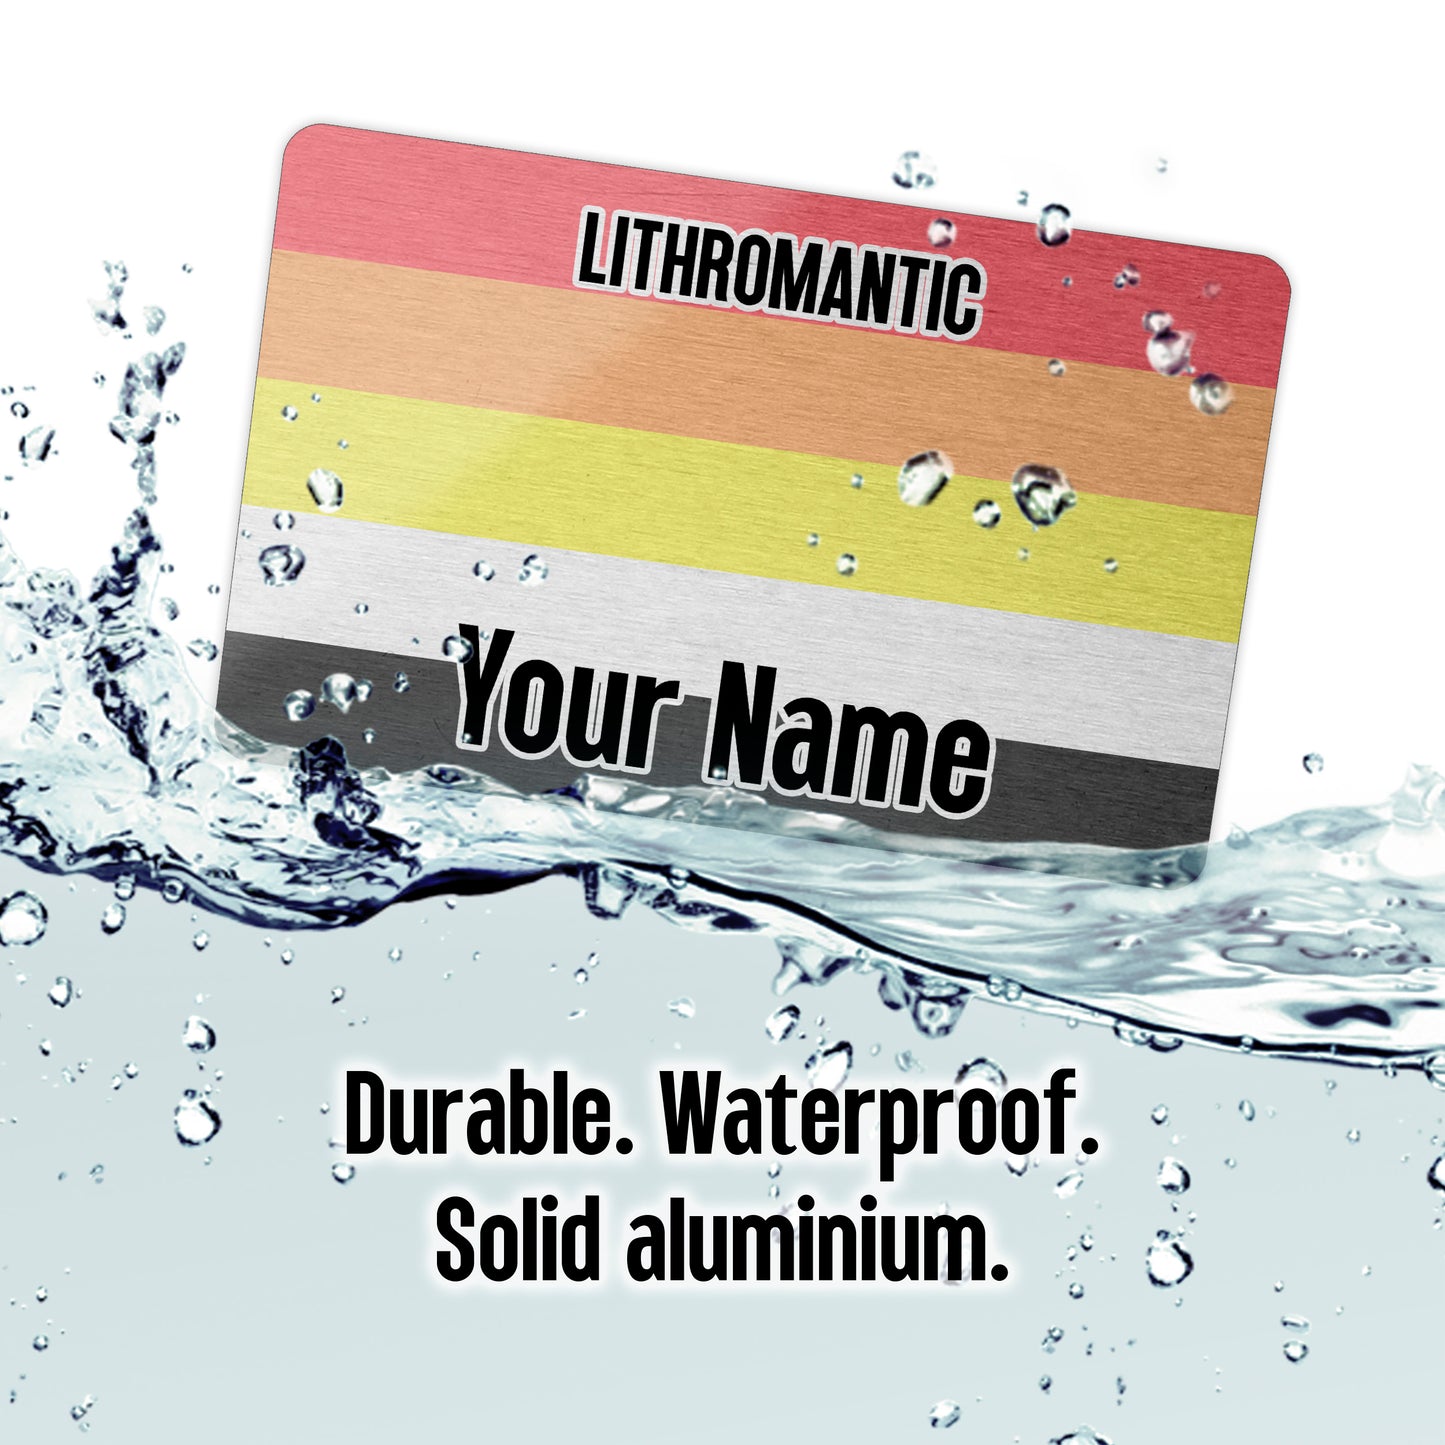 Aluminium wallet card personalised with your name and the lithromantic pride flag